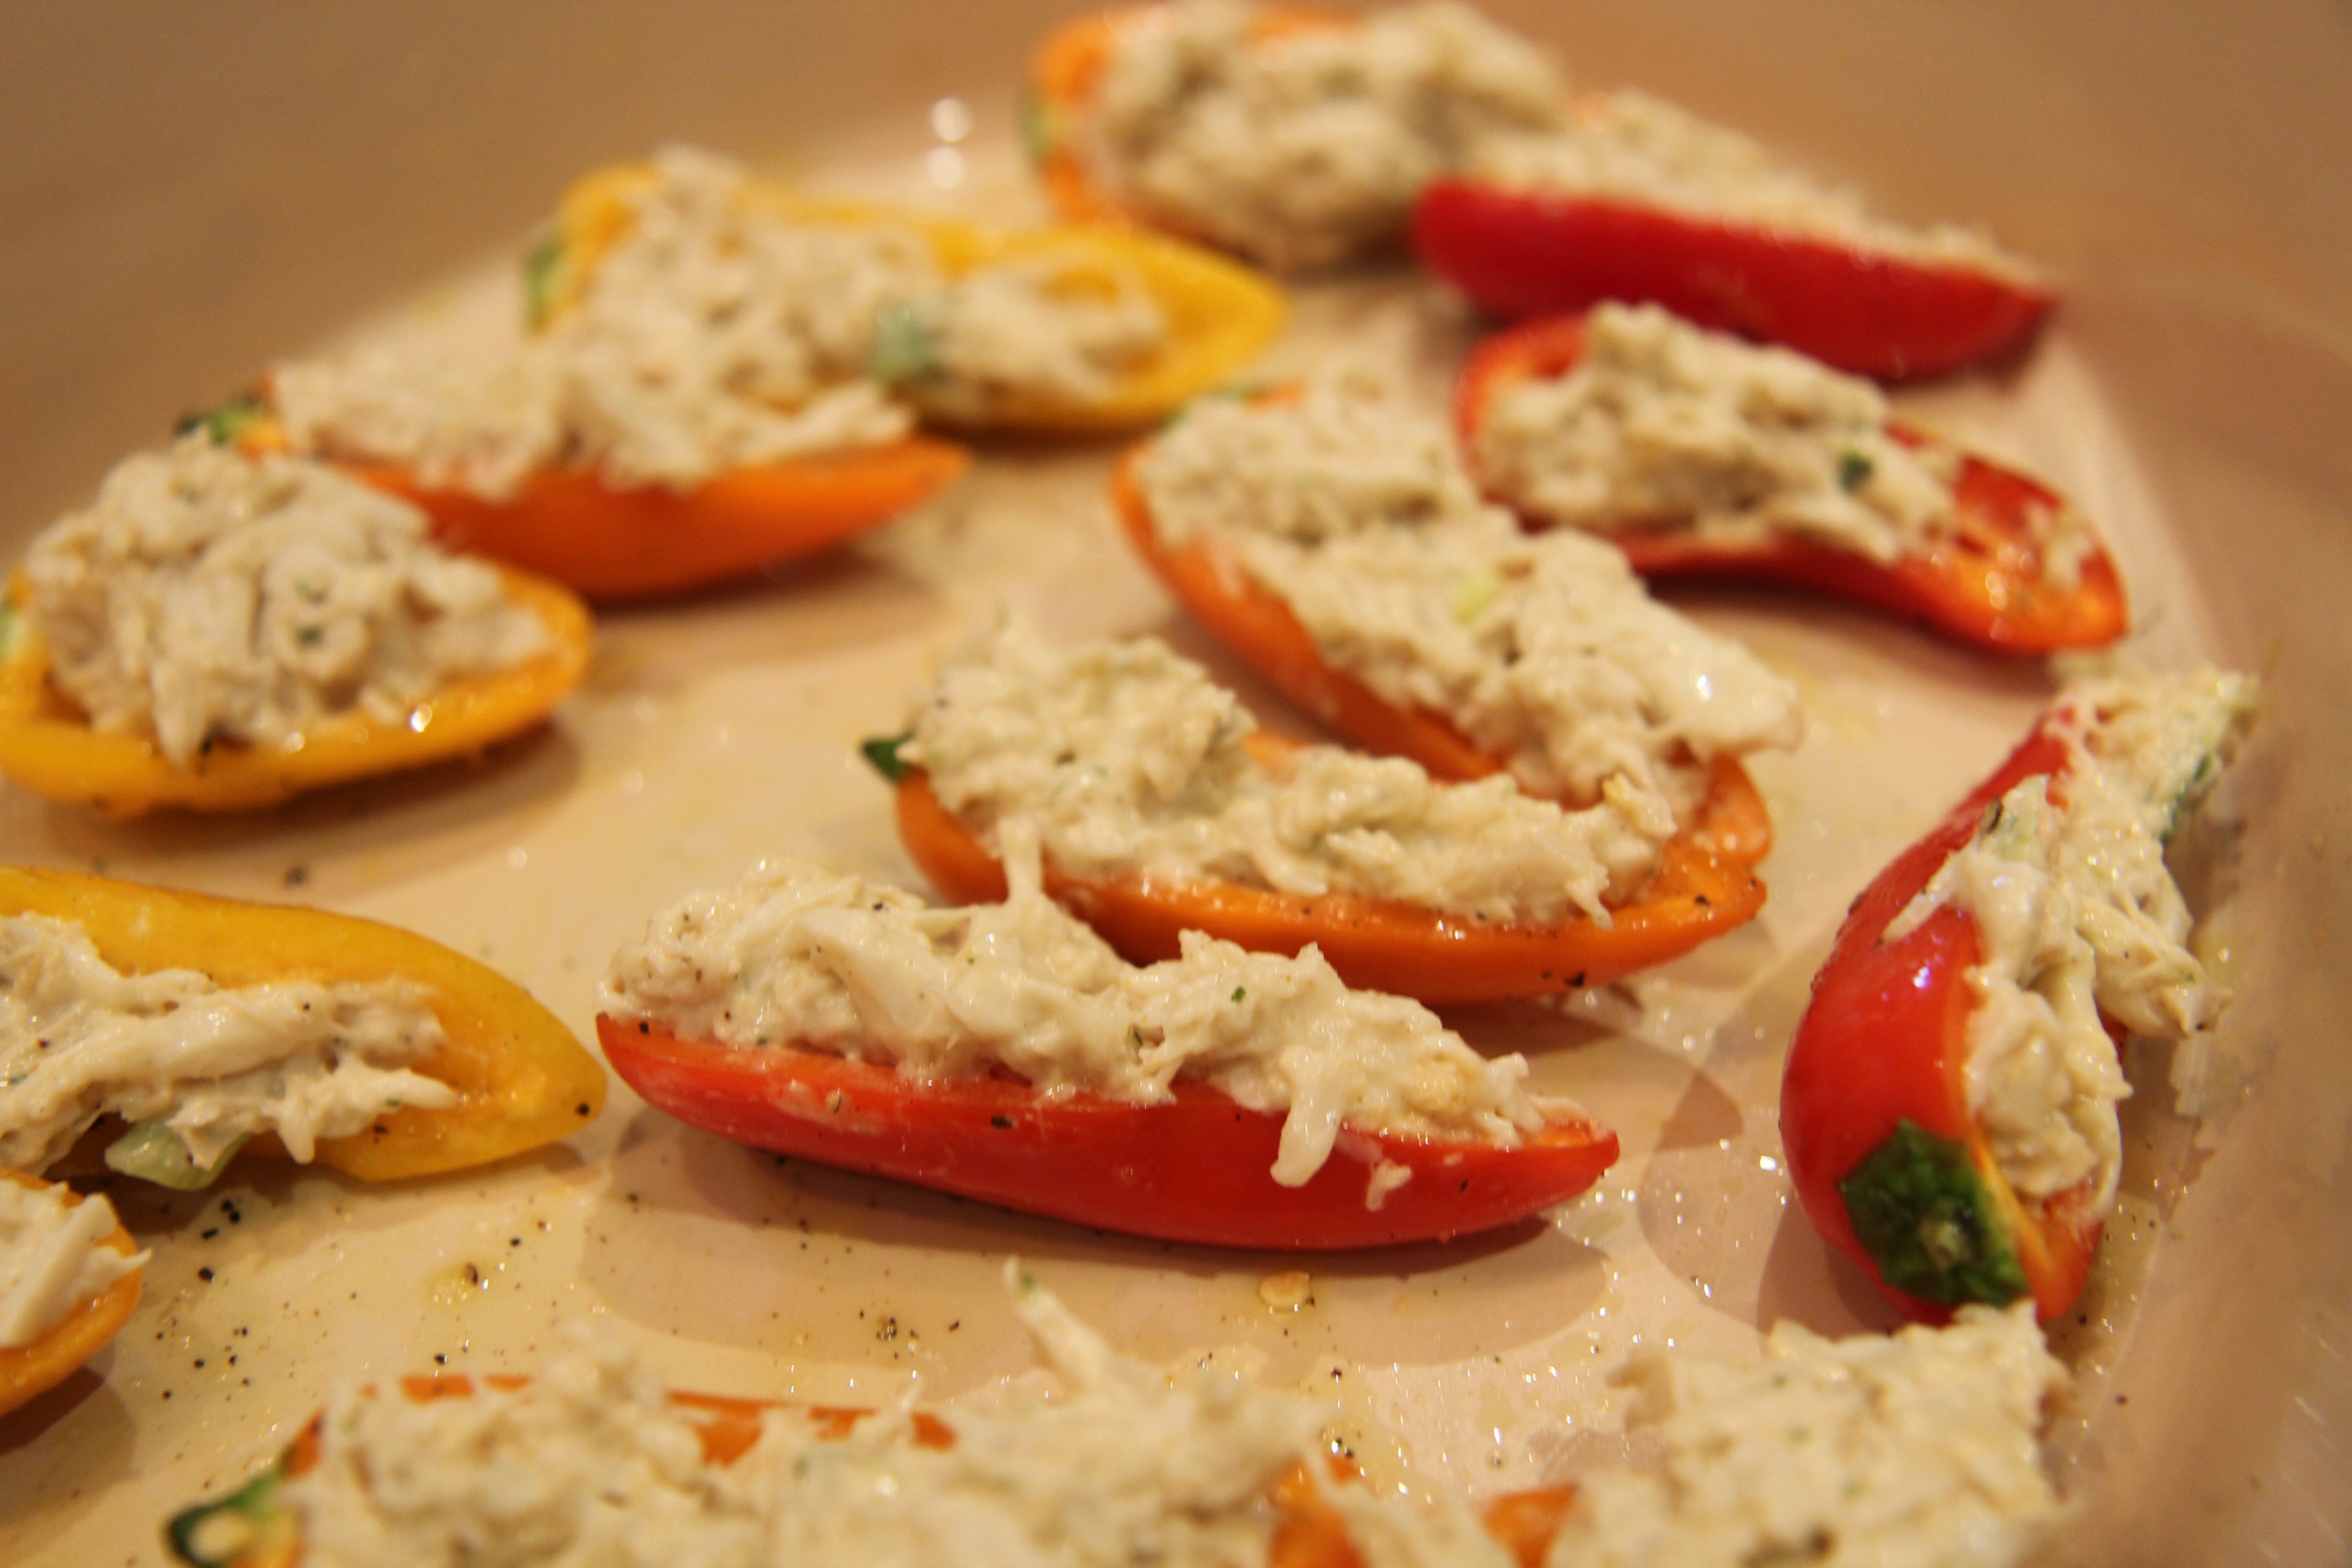 Drizzle the peppers with a little oil after filling them.